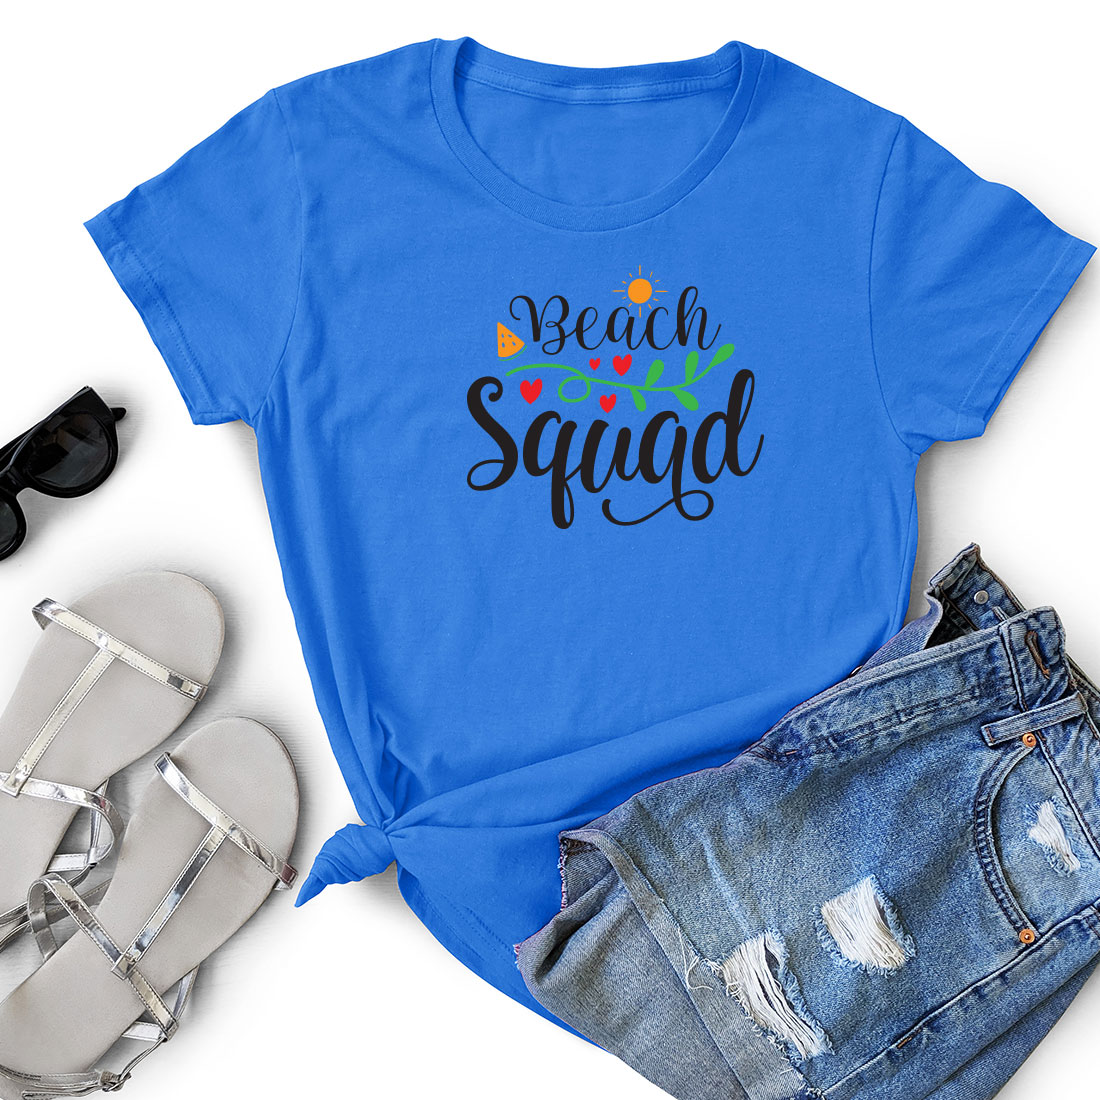 T - shirt that says beach squad next to a pair of shorts.